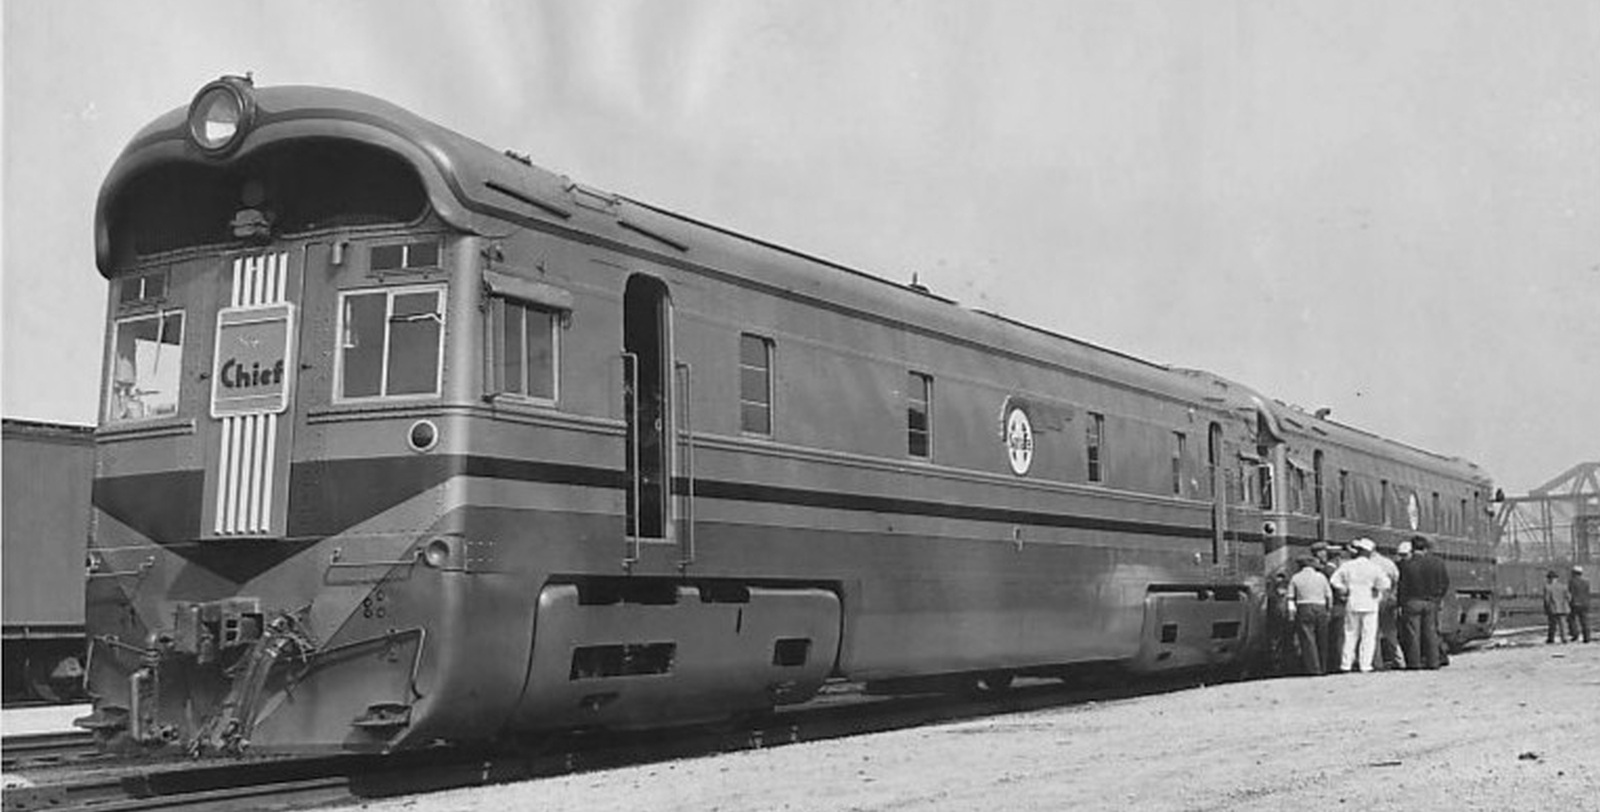 The two locomotives of the ATSF